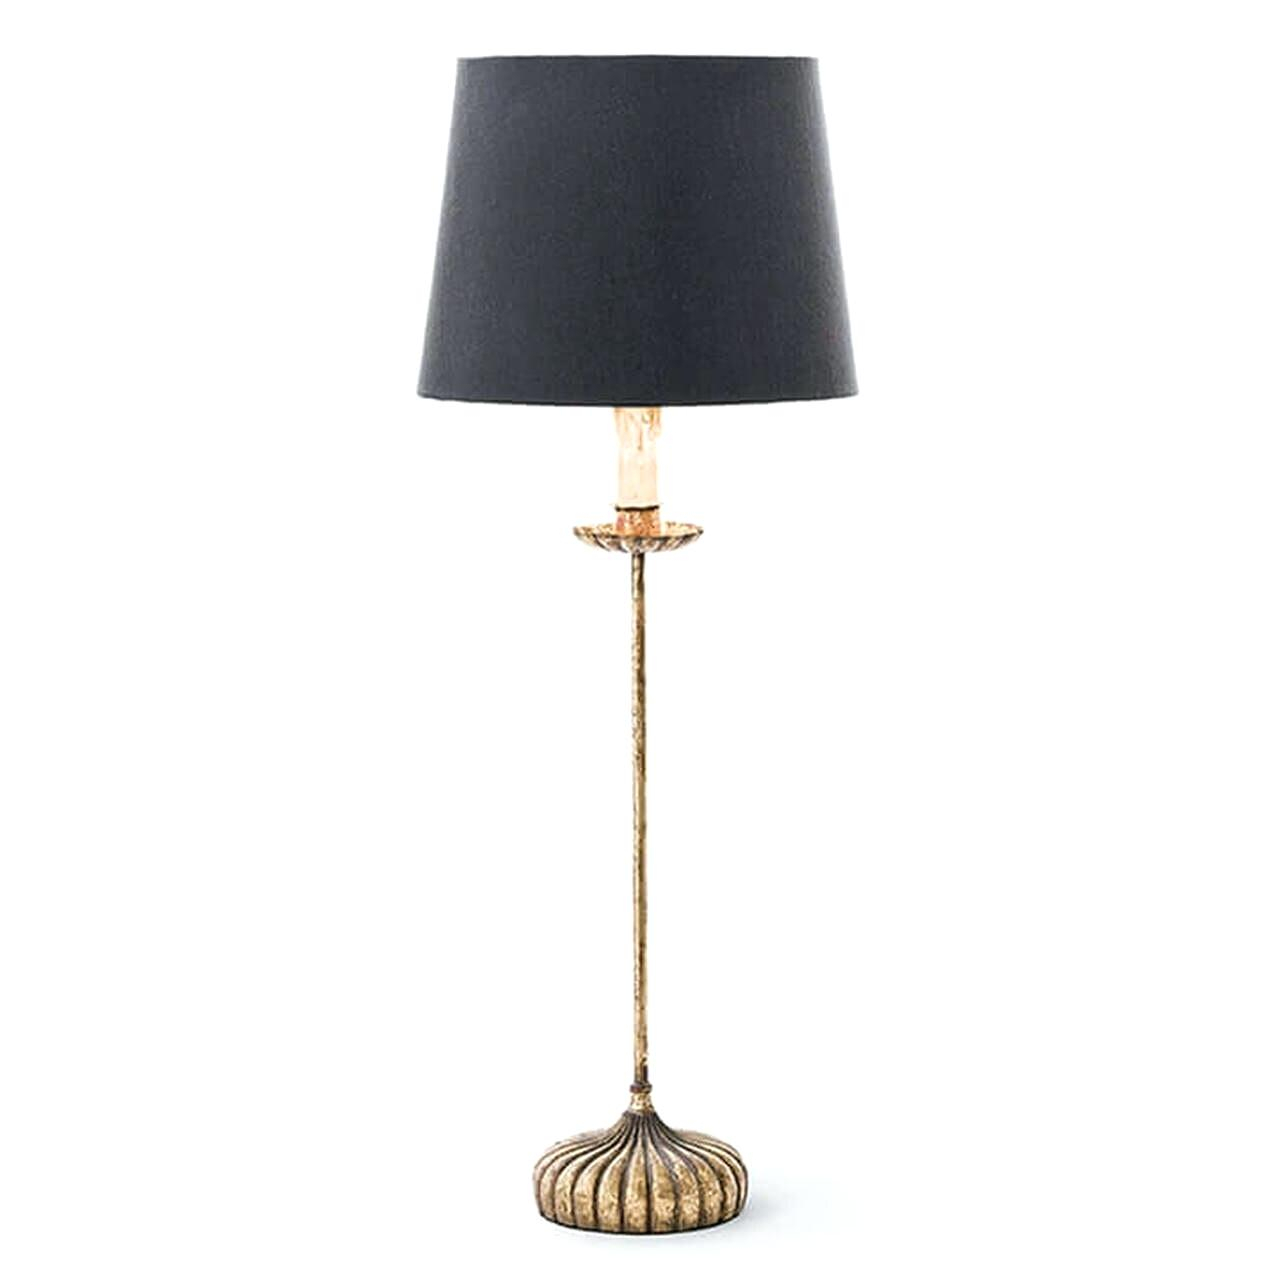 Black And Gold Table Lamps Shoppublicco intended for size 1280 X 1280